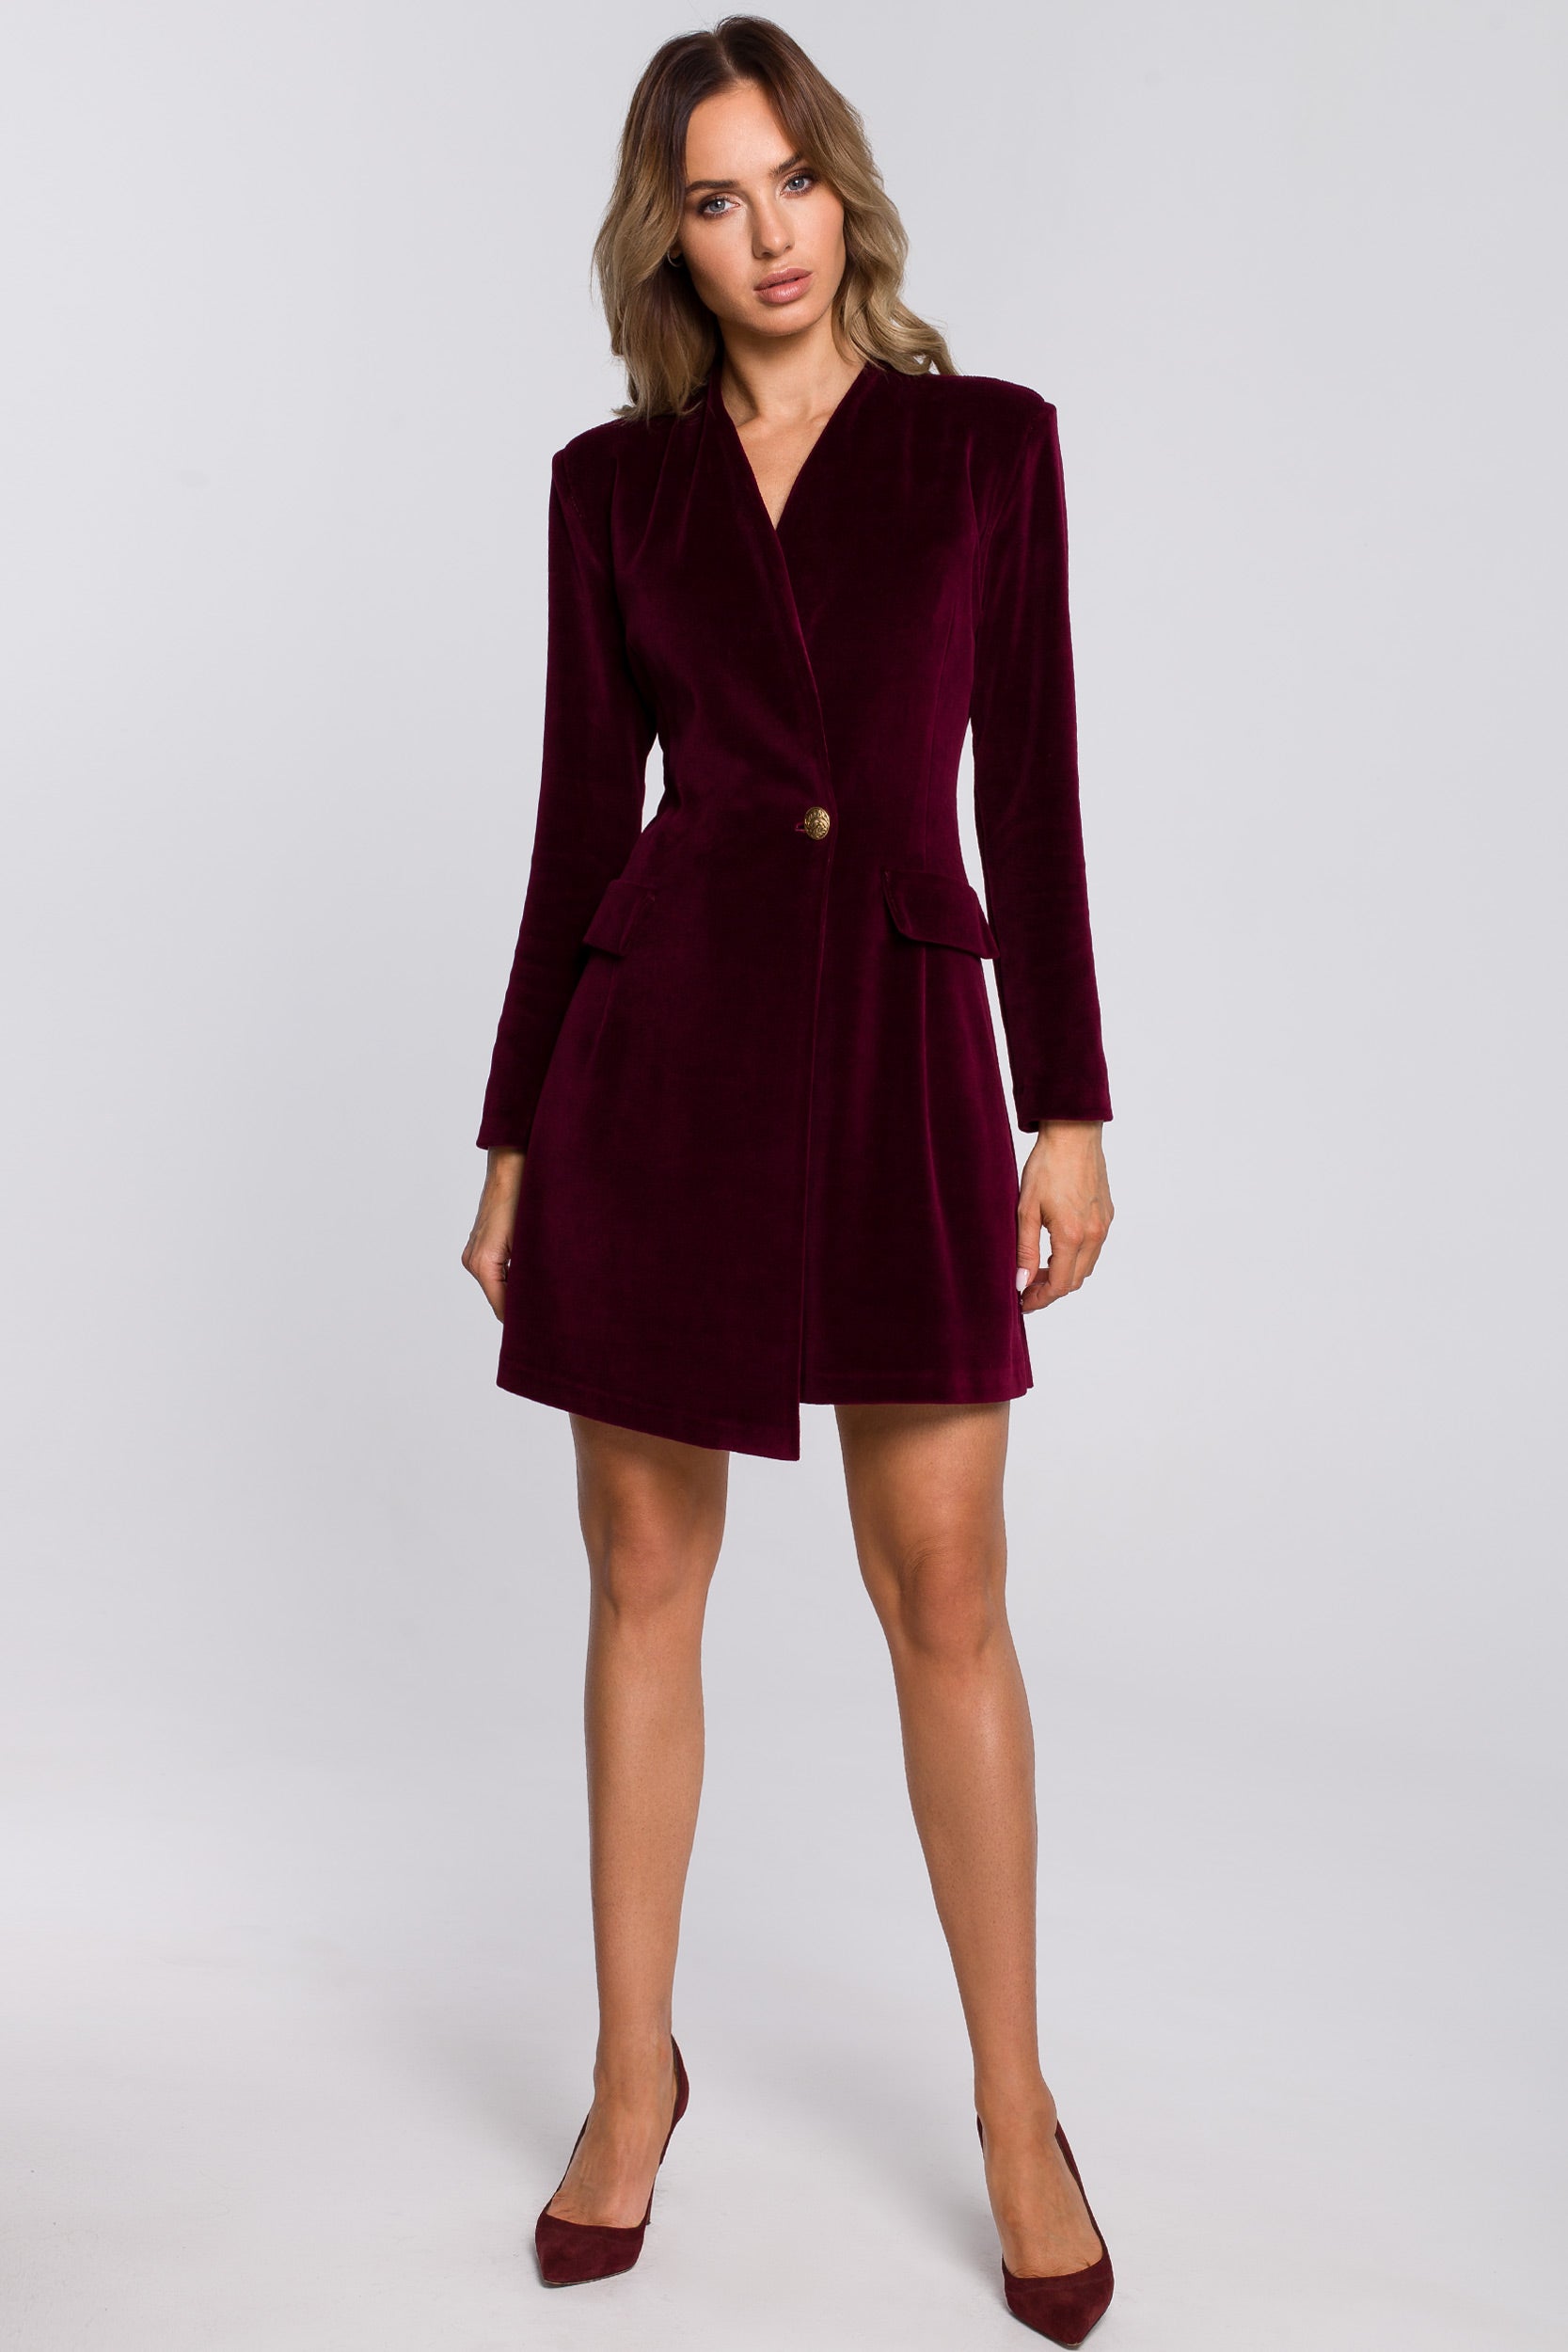 Elevate your style with our velvet mini dress. Featuring a V-neckline, long sleeves, and a single-button closure, this blazer dress is perfect for special occasions. Made from high-quality knit velvet fabric, it offers both comfort and opulence.